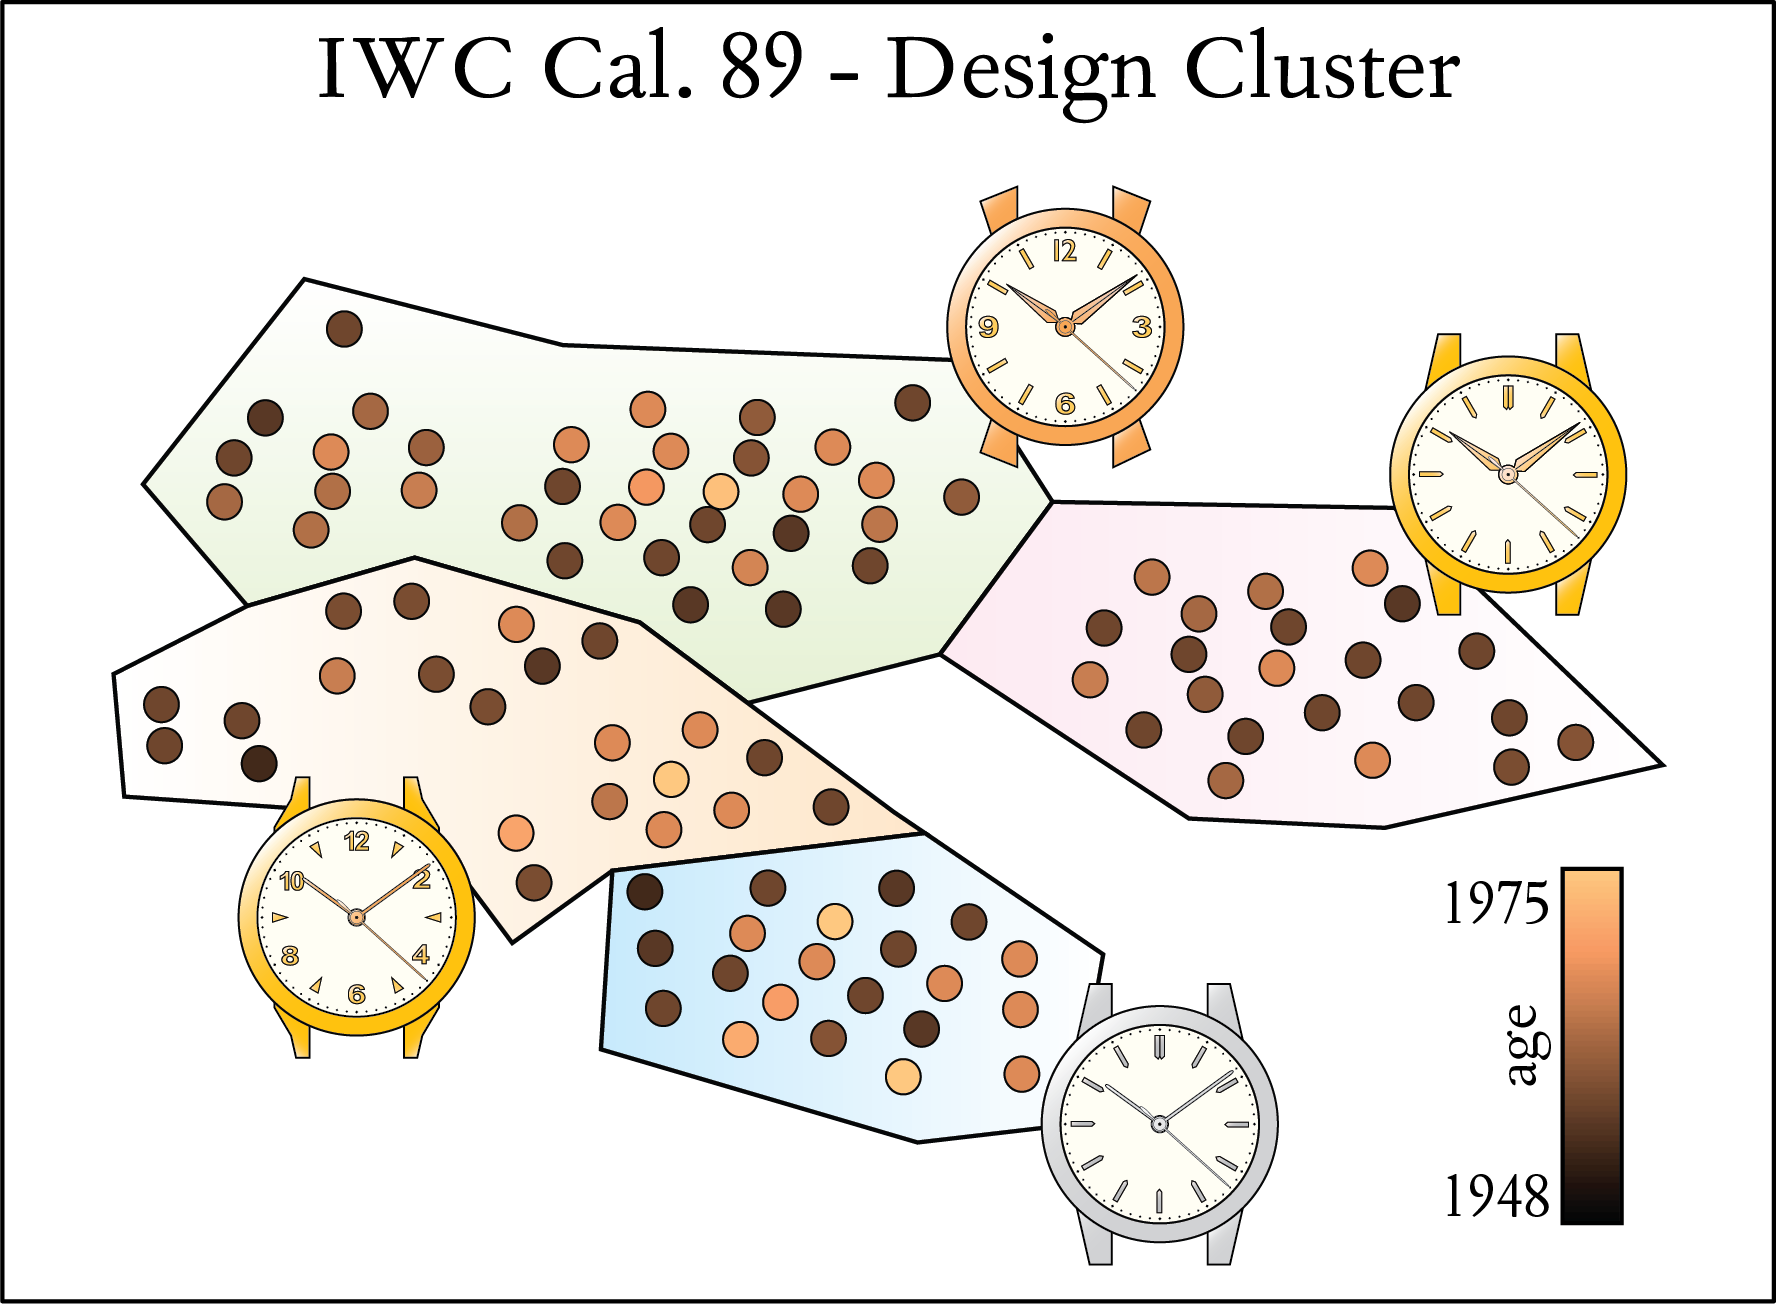 Design Cluster for the IWC Calibre 89 Dress Watches